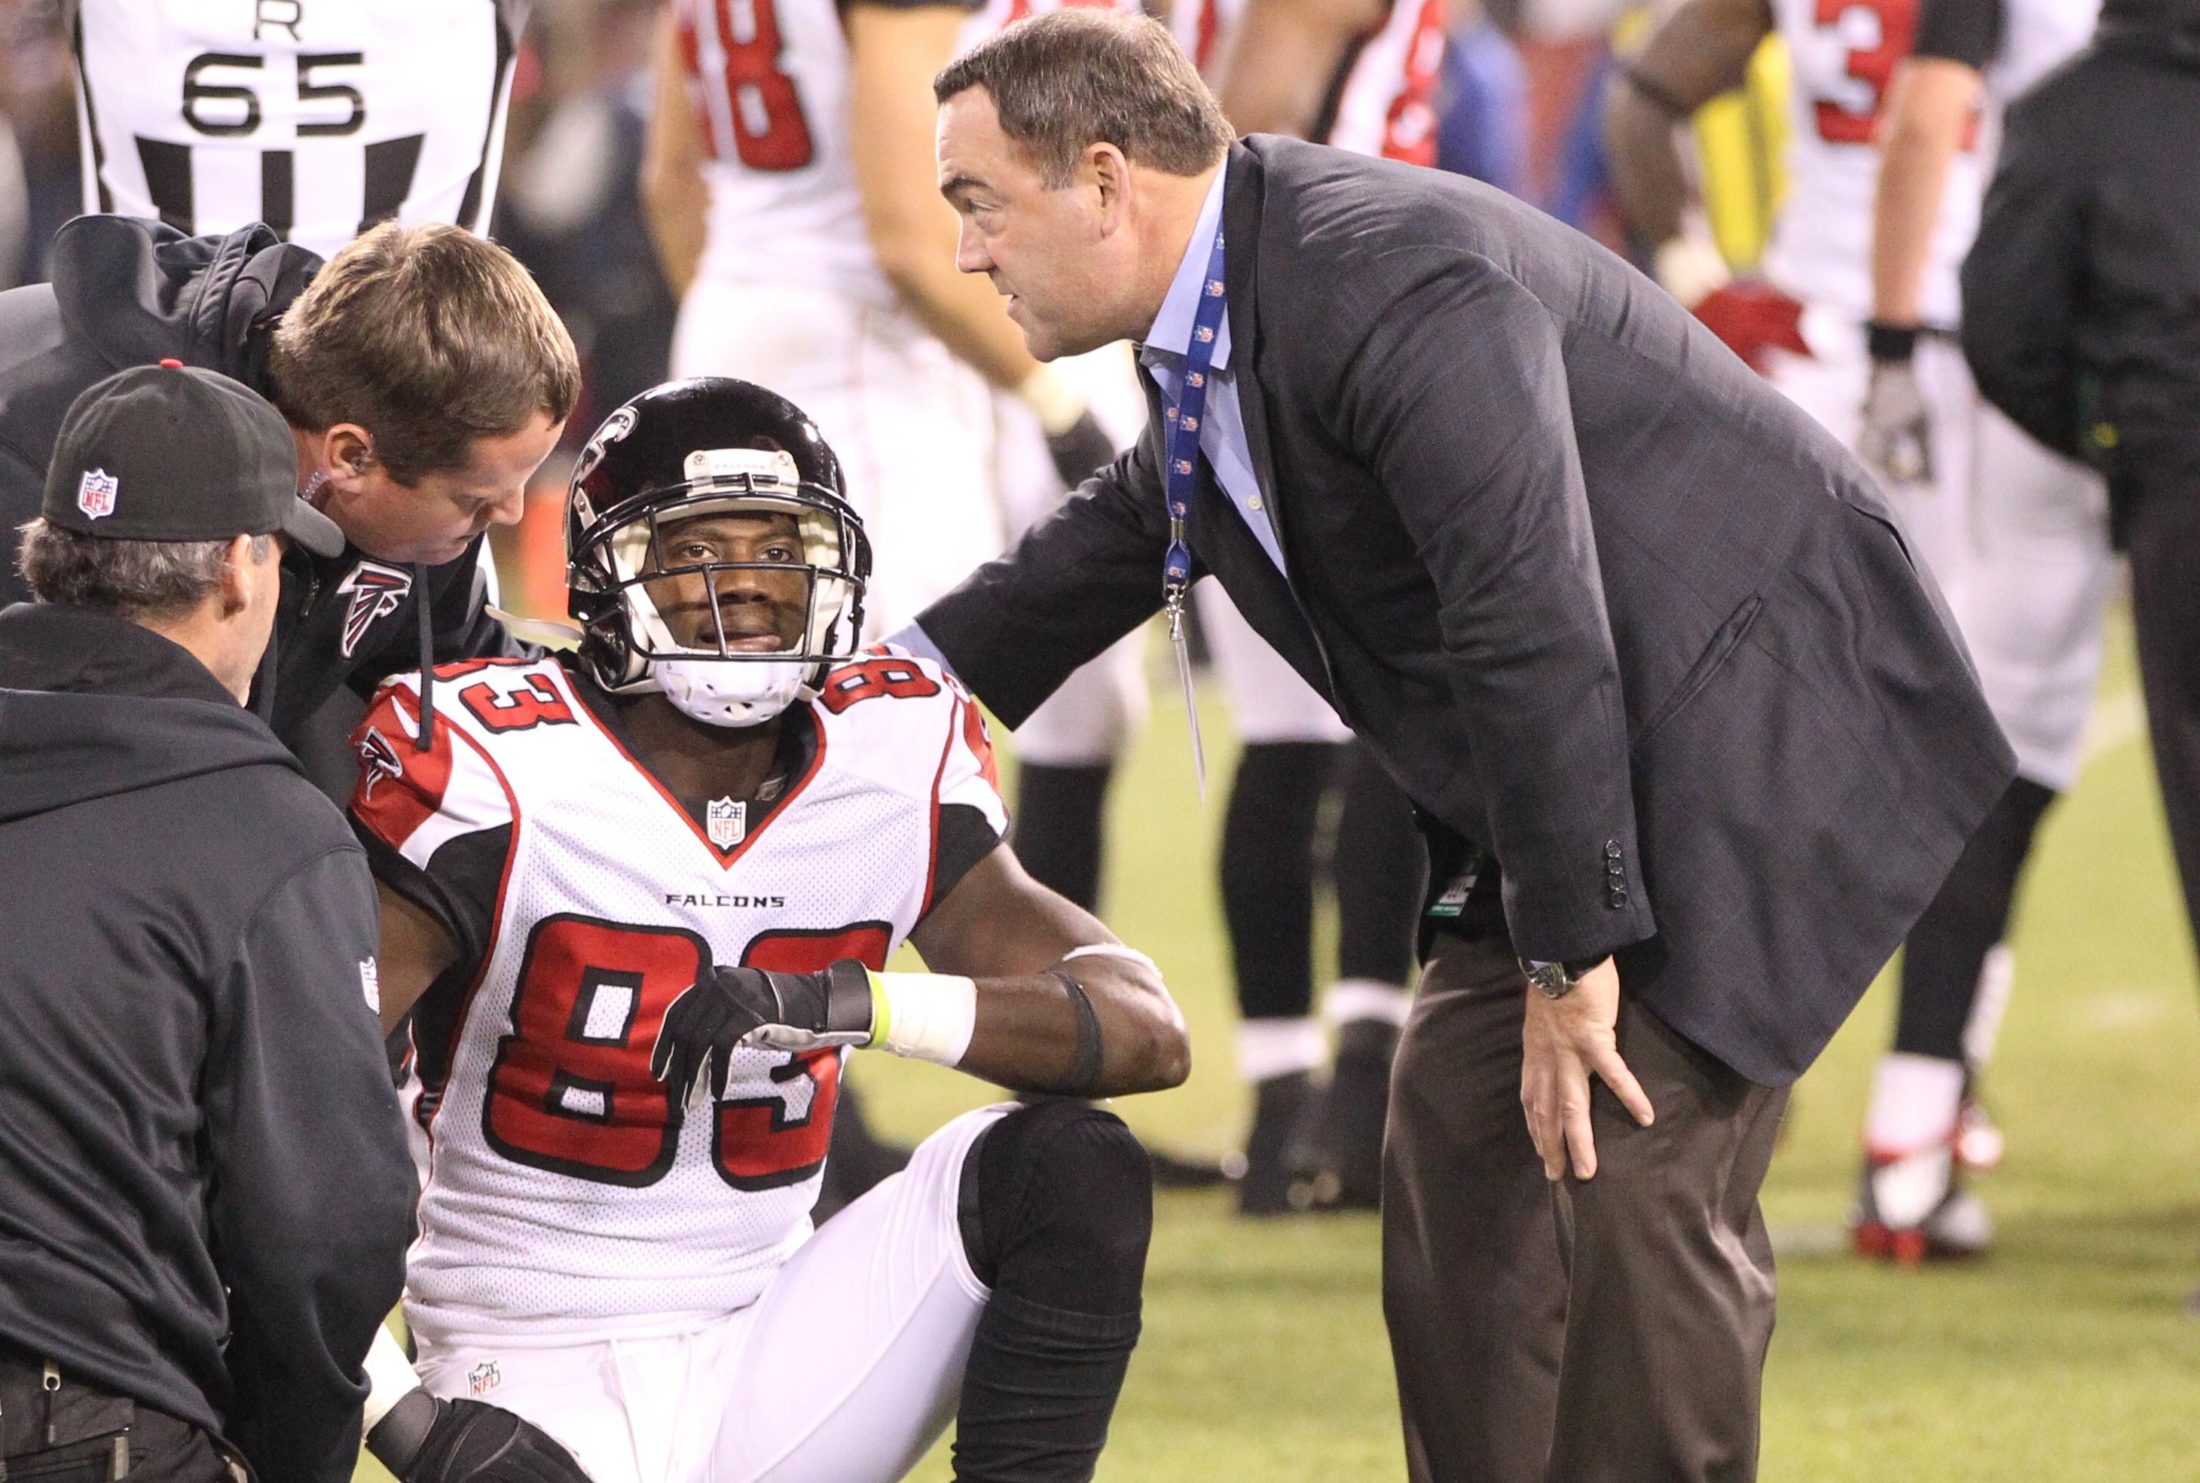 Dr. Spero Karas, head team physician for the Atlanta Falcons on the field with Falcons player